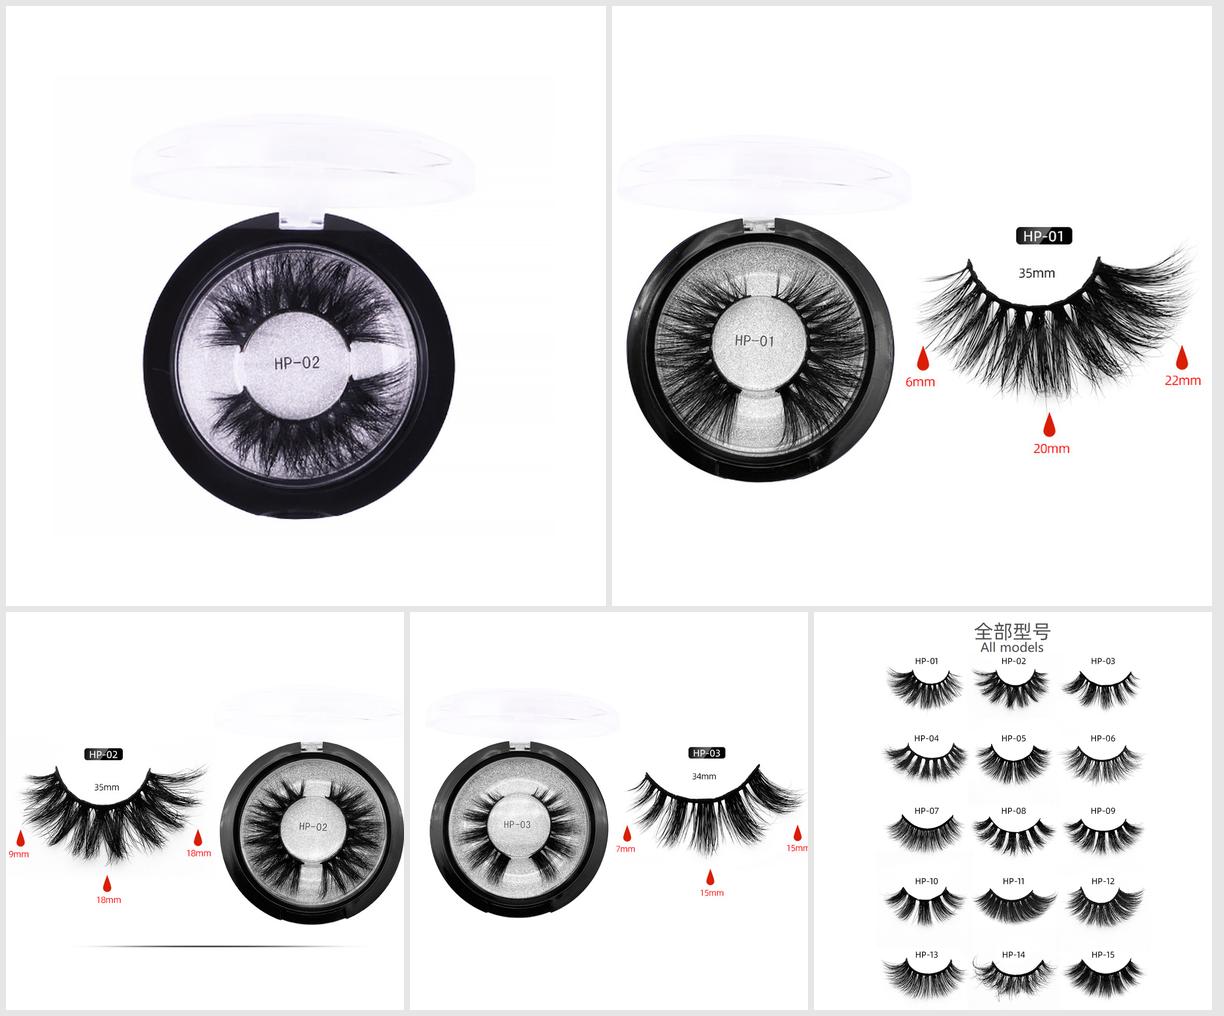 3D Mink False Eyelash: Thick and exaggerated for eye-catching look